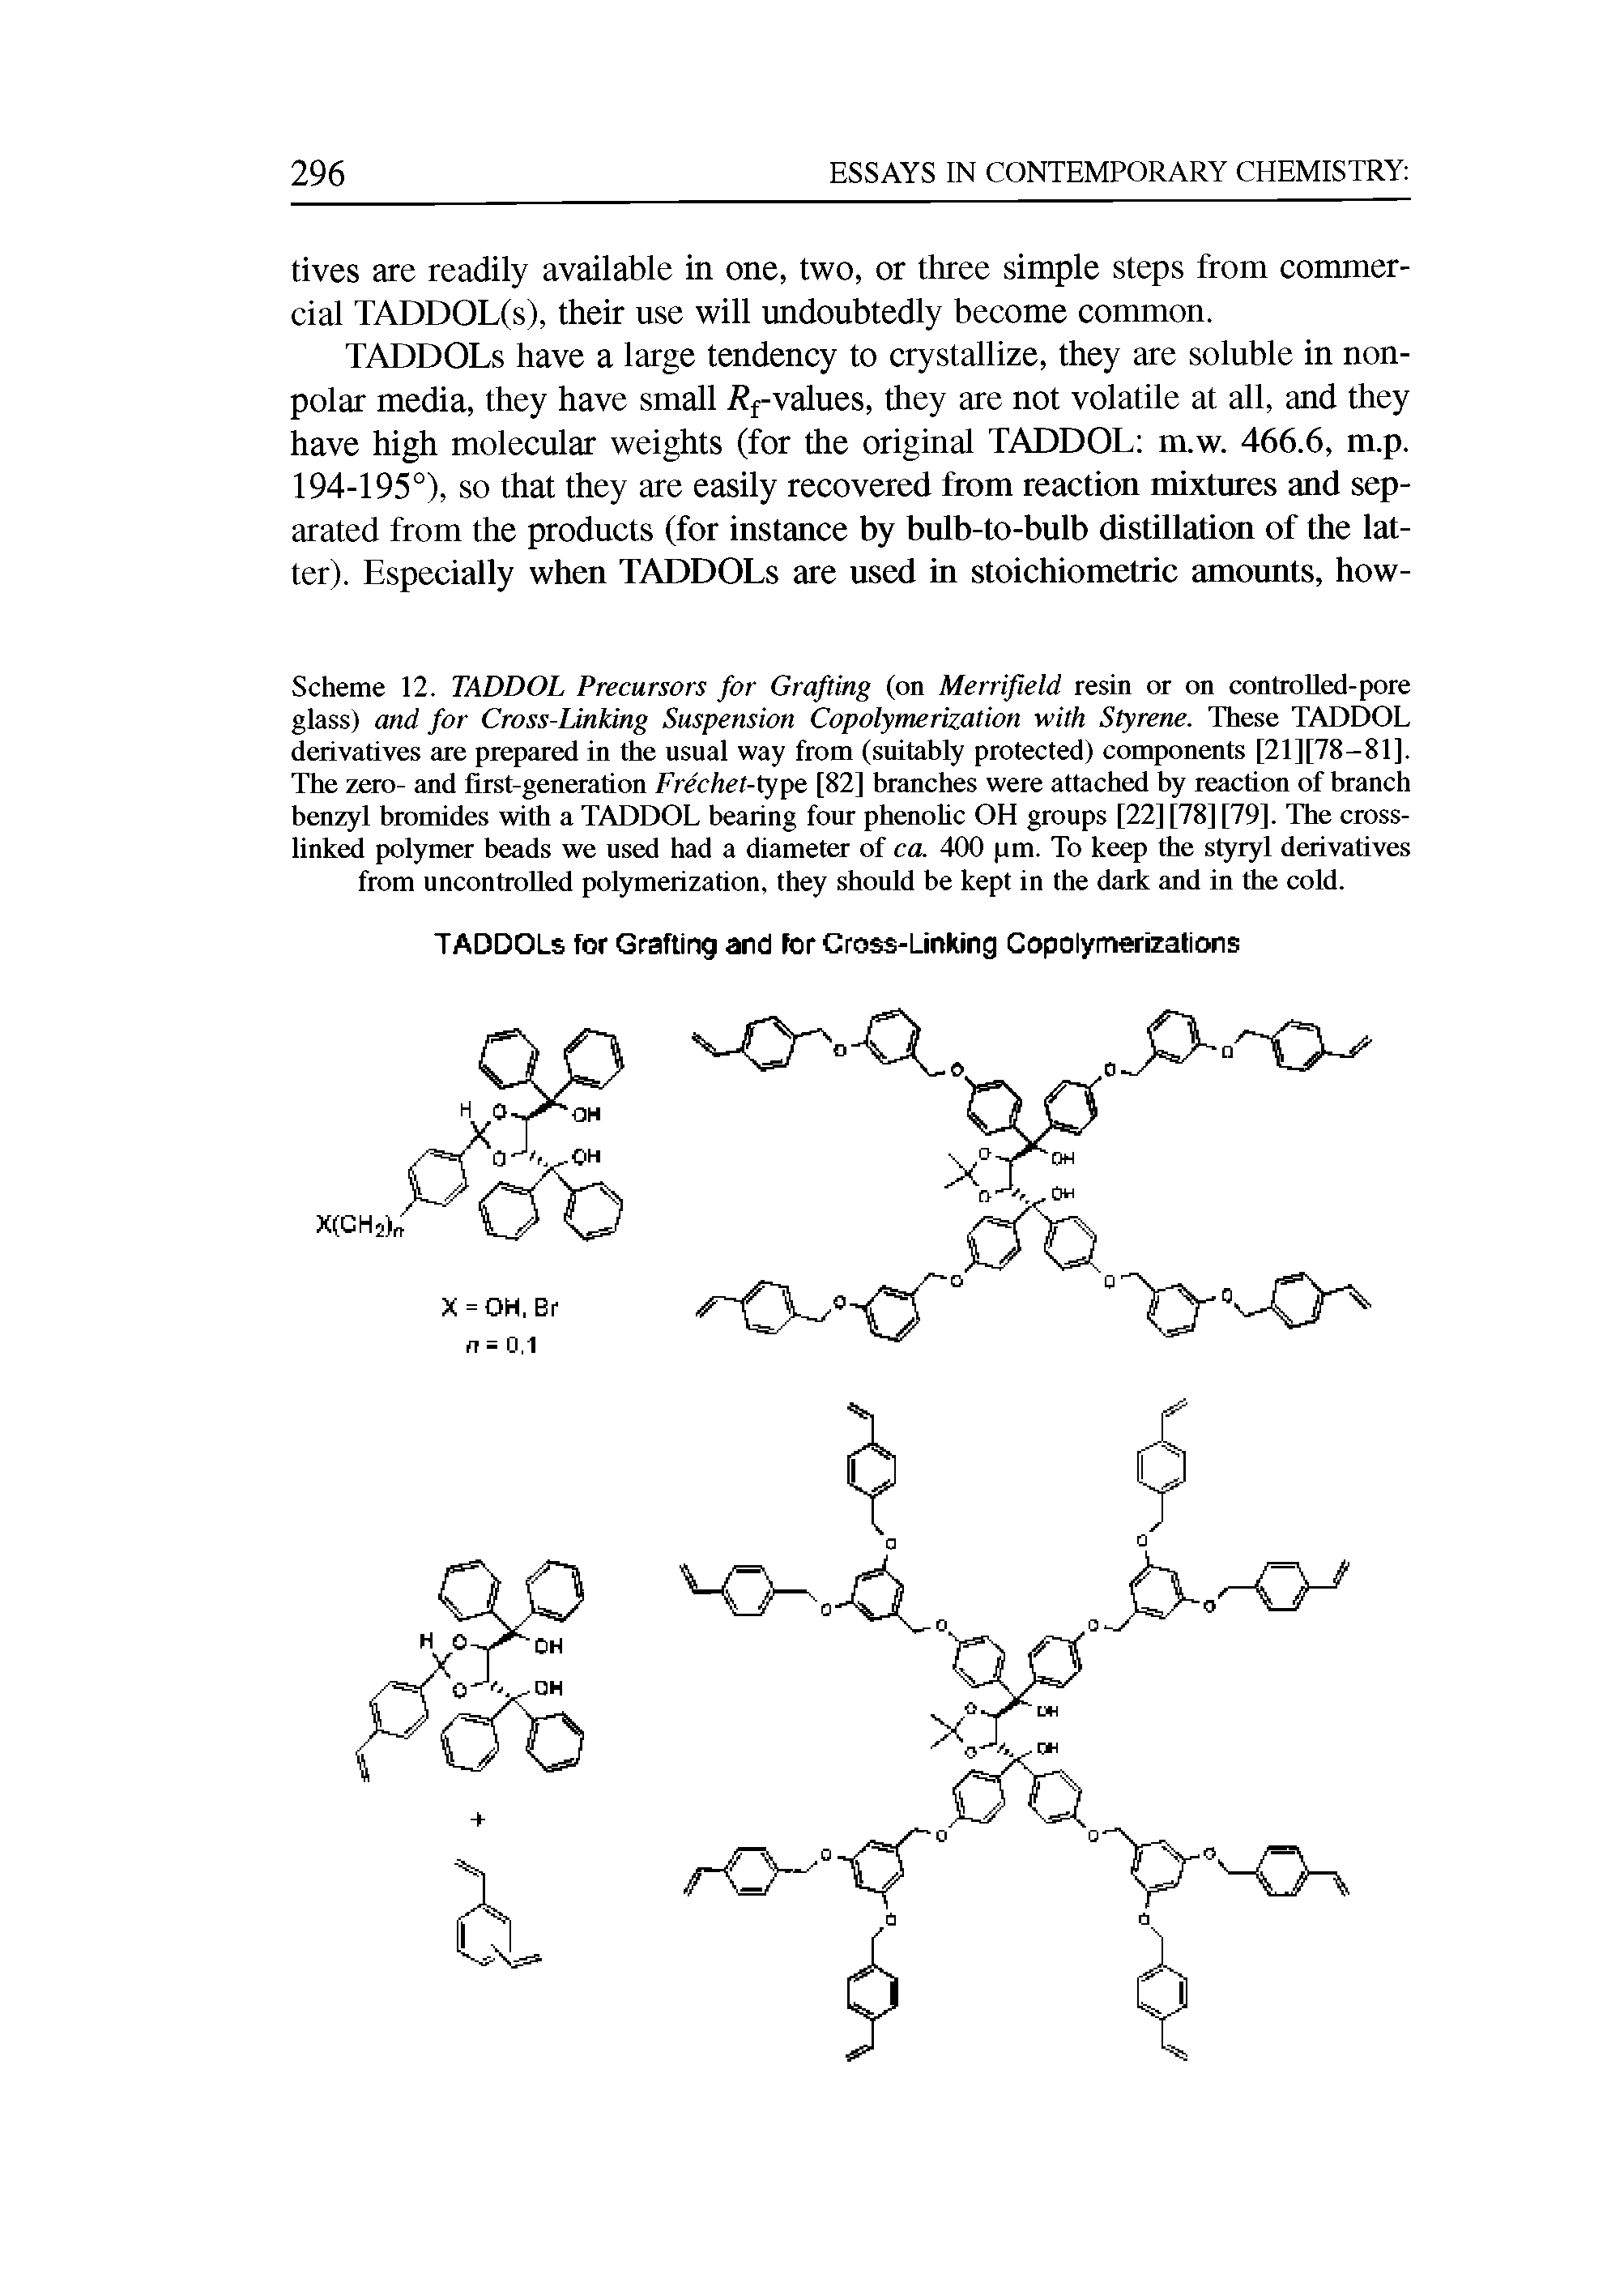 Scheme 12. TADDOL Precursors for Grafting (on Merrifield resin or on controlled-pore glass) and for Cross-Linking Suspension Copolymerization with Styrene. These TADDOL derivatives are prepared in the usual way from (suitably protected) components [21][78-81]. The zero- and first-generation Frechet-type [82] branches were attached by reaction of branch benzyl bromides with a TADDOL bearing four phenohc OH groups [22] [78] [79]. The cross-linked polymer beads we used had a diameter of ca. 400 pm. To keep the styryl derivatives from uncontroUed polymerization, they should be kept in the dark and in the cold.